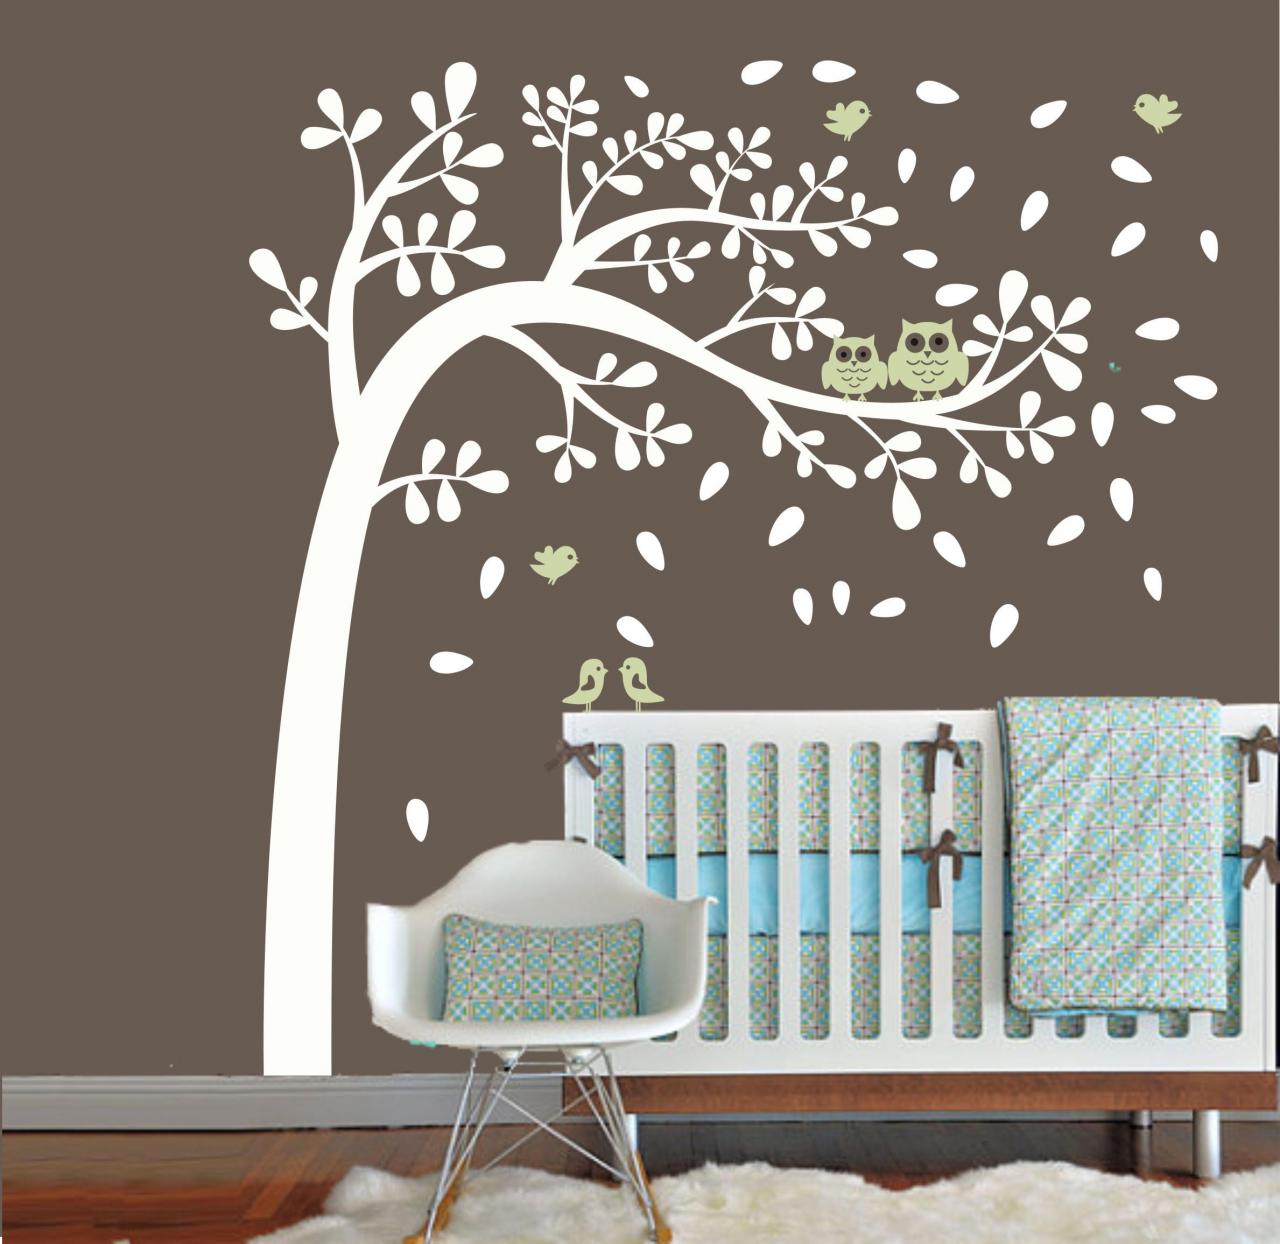 Vinyl Wall Decal Wind Flying Leaf Tree With Cute Bird Owl Mommy Birds Home House Art Wall Decals Wall Sticker Stickers Baby Room Kid H825